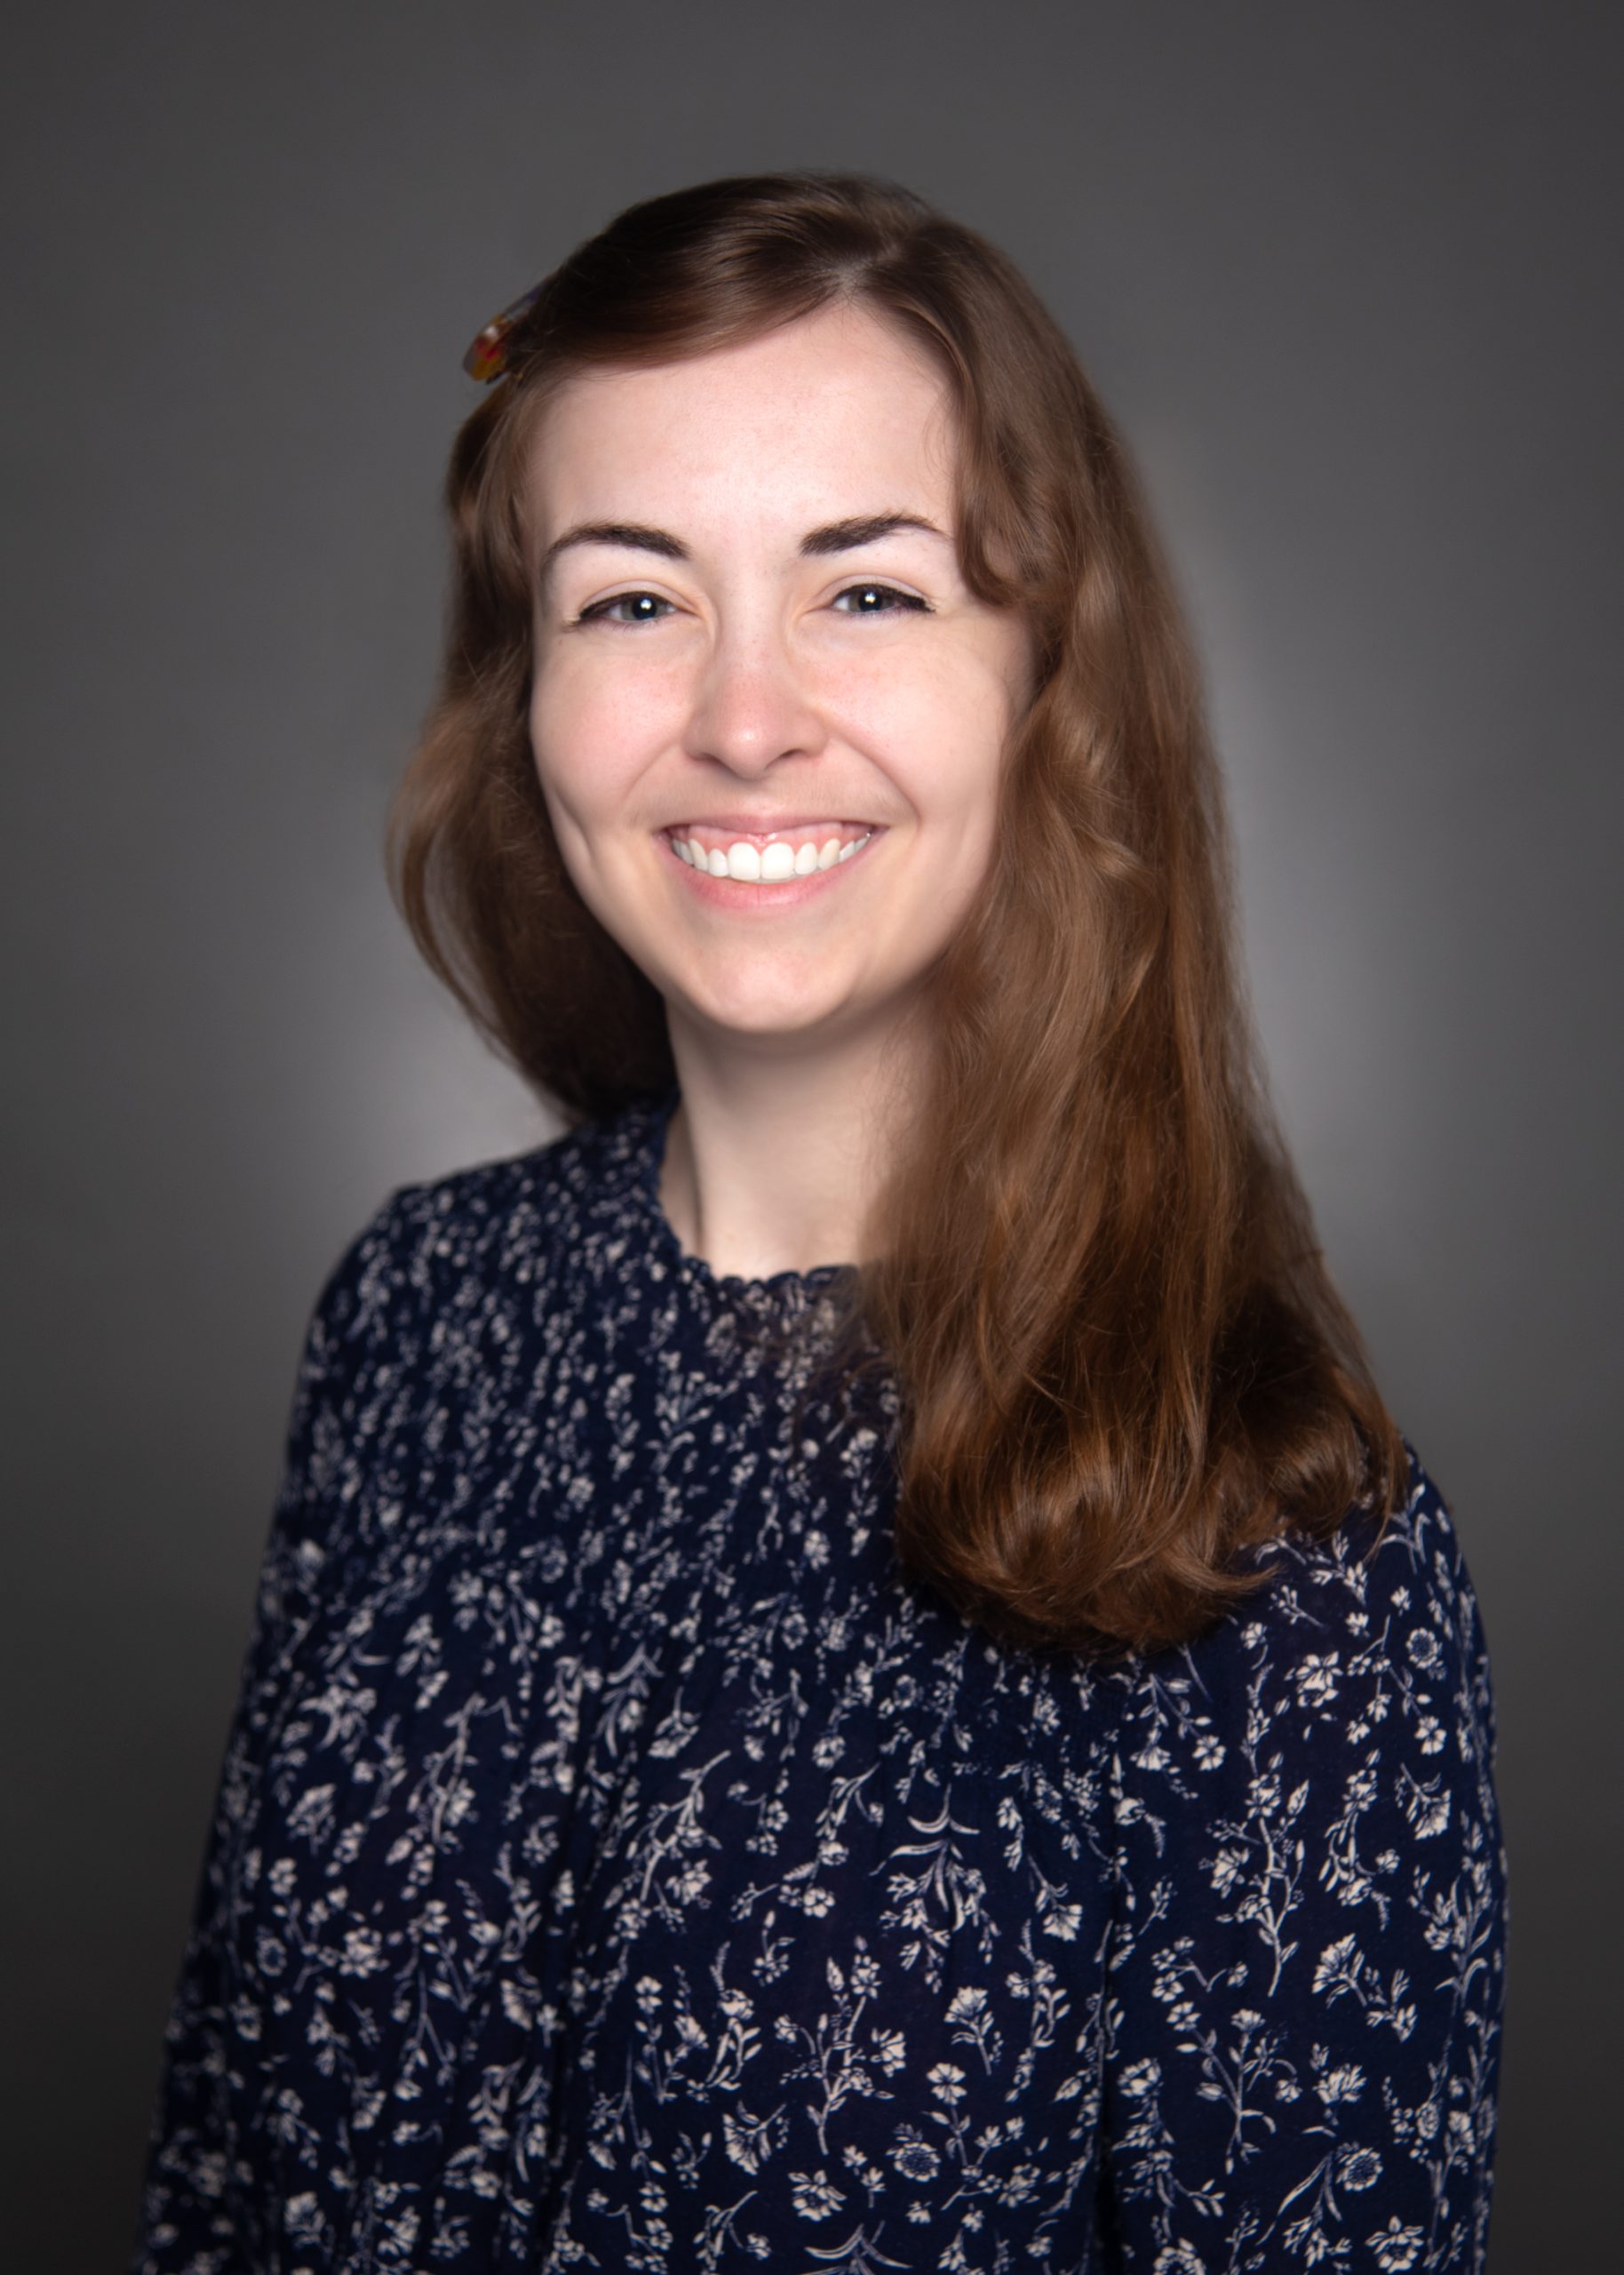 professional headshot of Claire Segura, Audit Associate, wearing a floral blouse